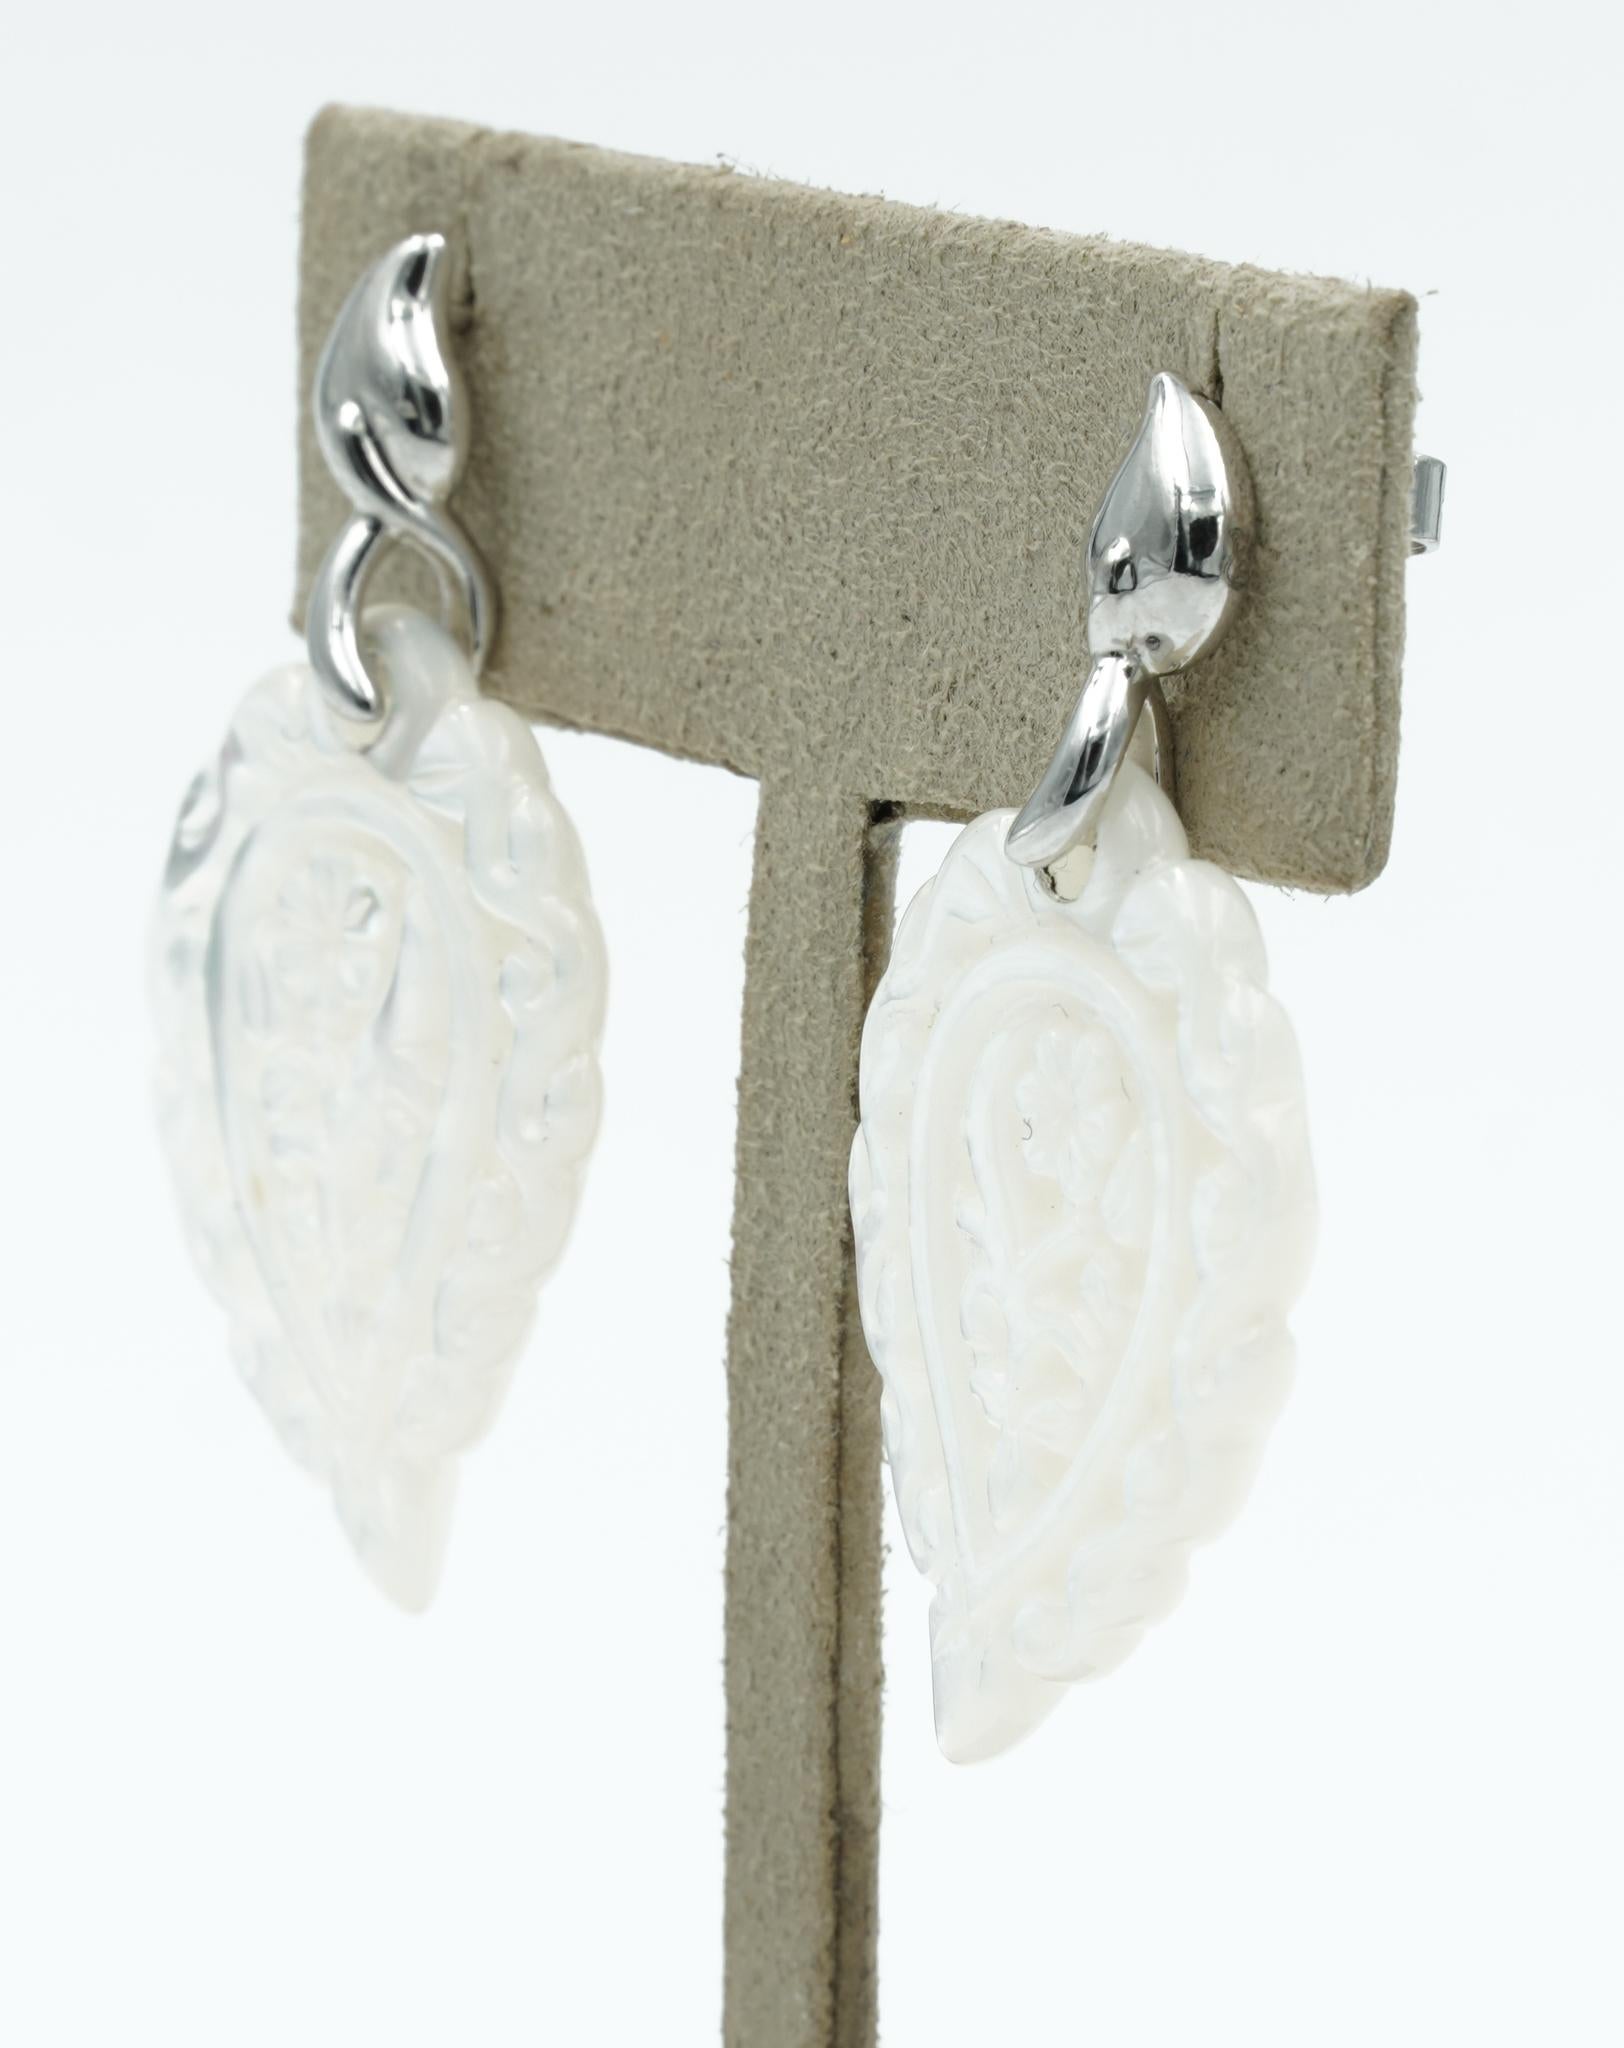 The INDIA Mother of Pearl earrings are a beautiful, casual classic. The dangling leaf is hand-carved on both sides and frames the face charmingly. Attached to an iconic drop-shaped stud in white gold, it is the perfect lightweight, everyday